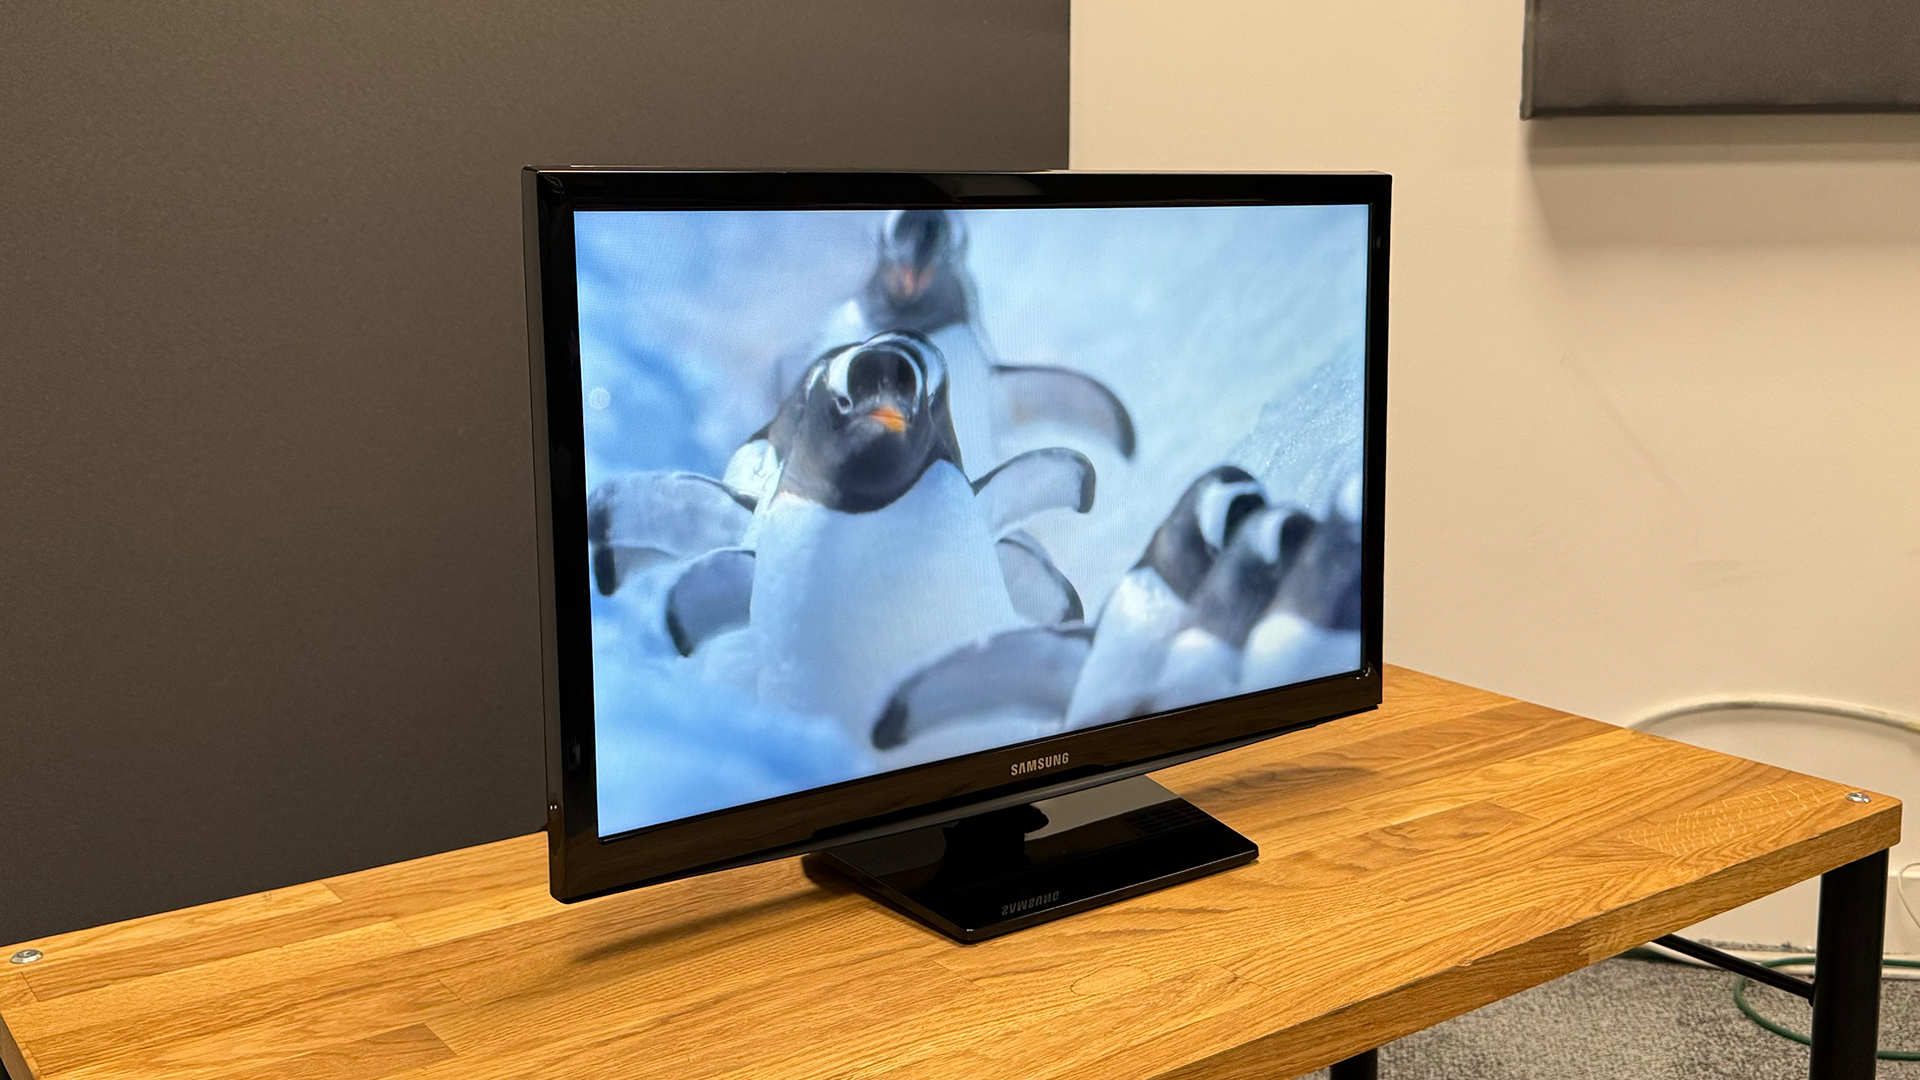 Samsung UE24N4300 TV slight angle from left showing penguins on screen